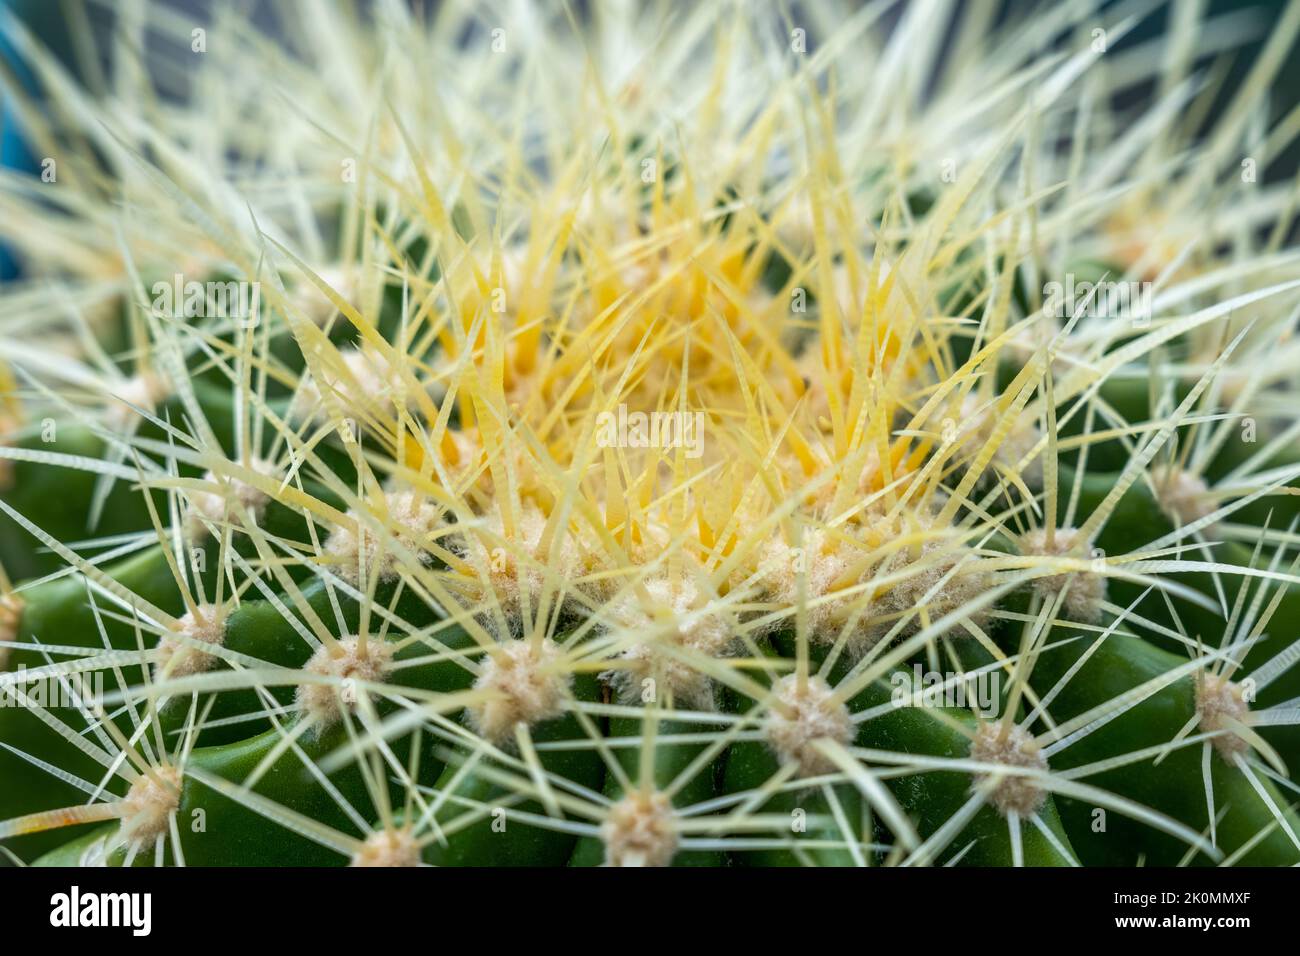 Top of a barrel cactus or mother-in-law's seat with all its fine needle-like tips on a cloudy day Stock Photo